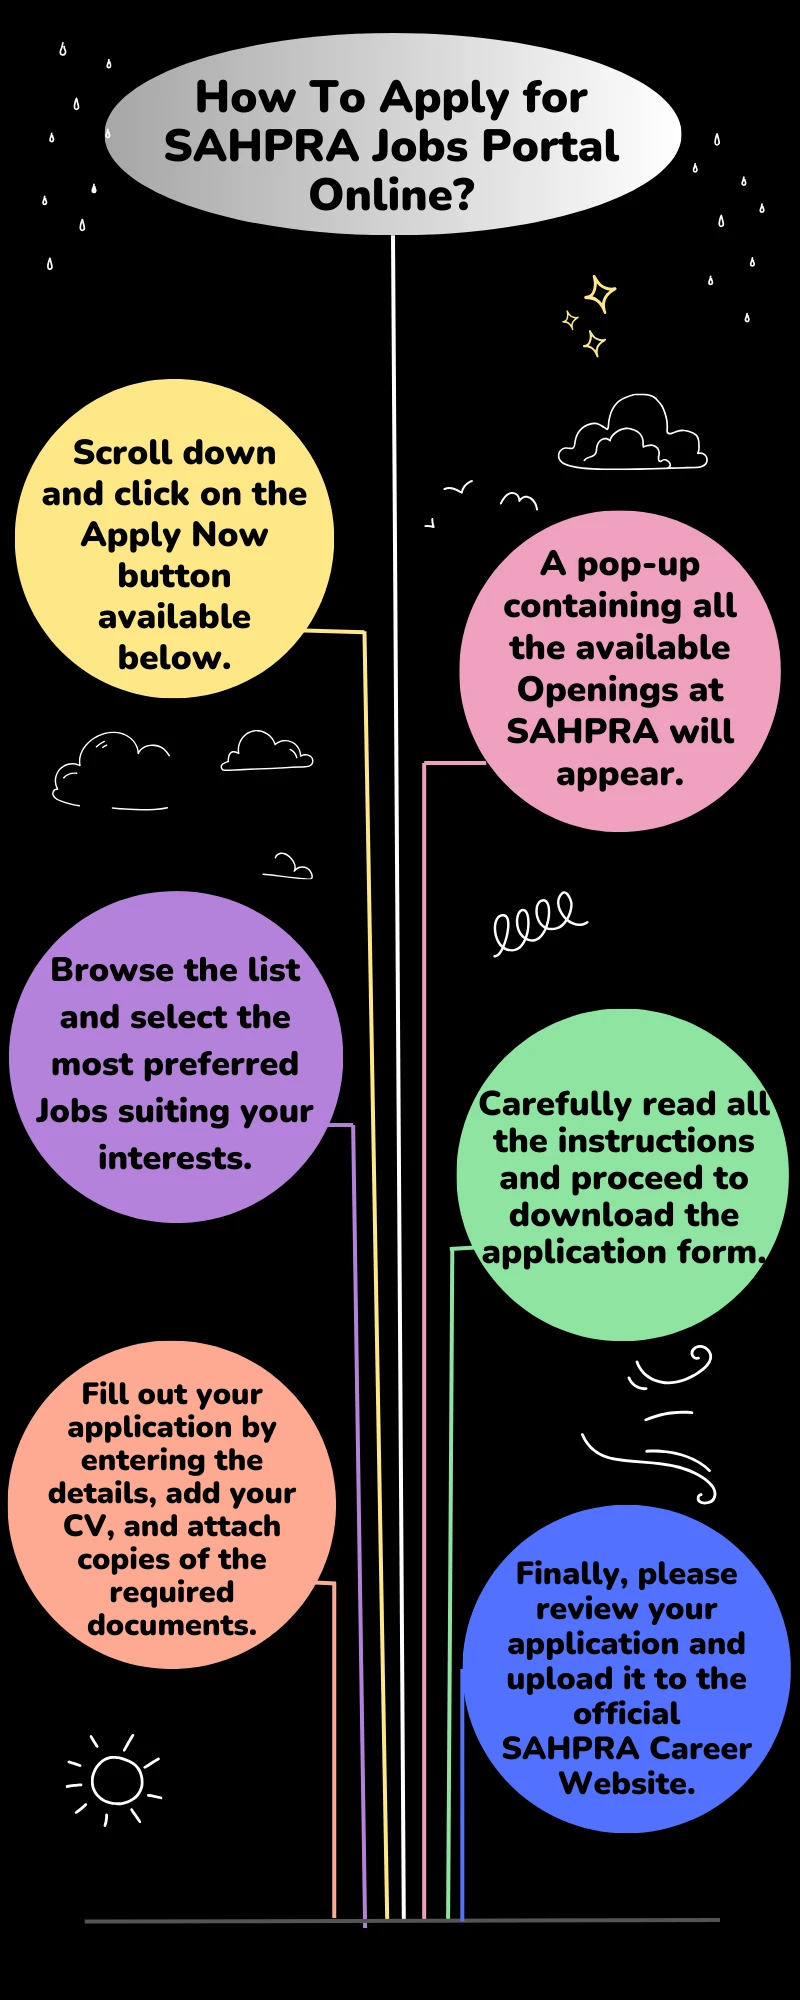 How To Apply for SAHPRA Jobs Portal Online?